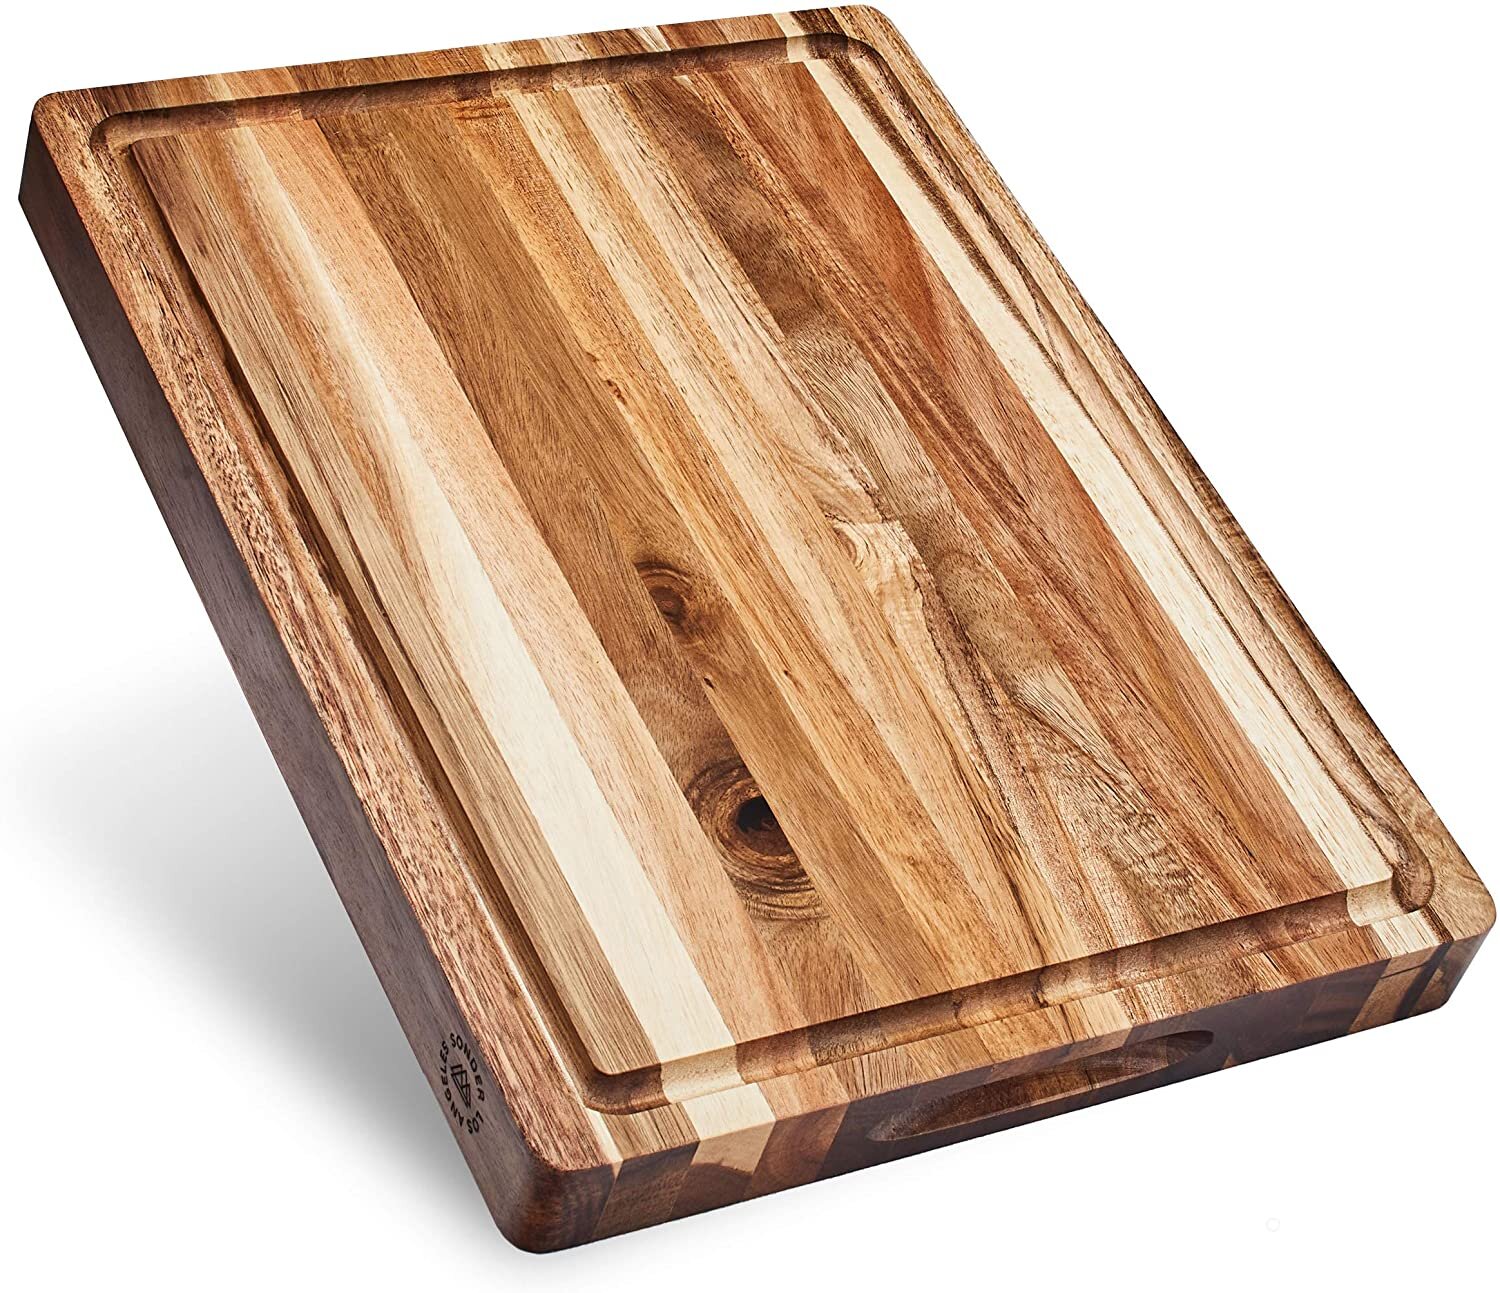 Sonder Los Angeles, Large Multipurpose Sustainable Acacia Wood Cutting Board, 16x12x1.5in Juice Groove, Reversible with Cracker Holder (Gift Box Included)